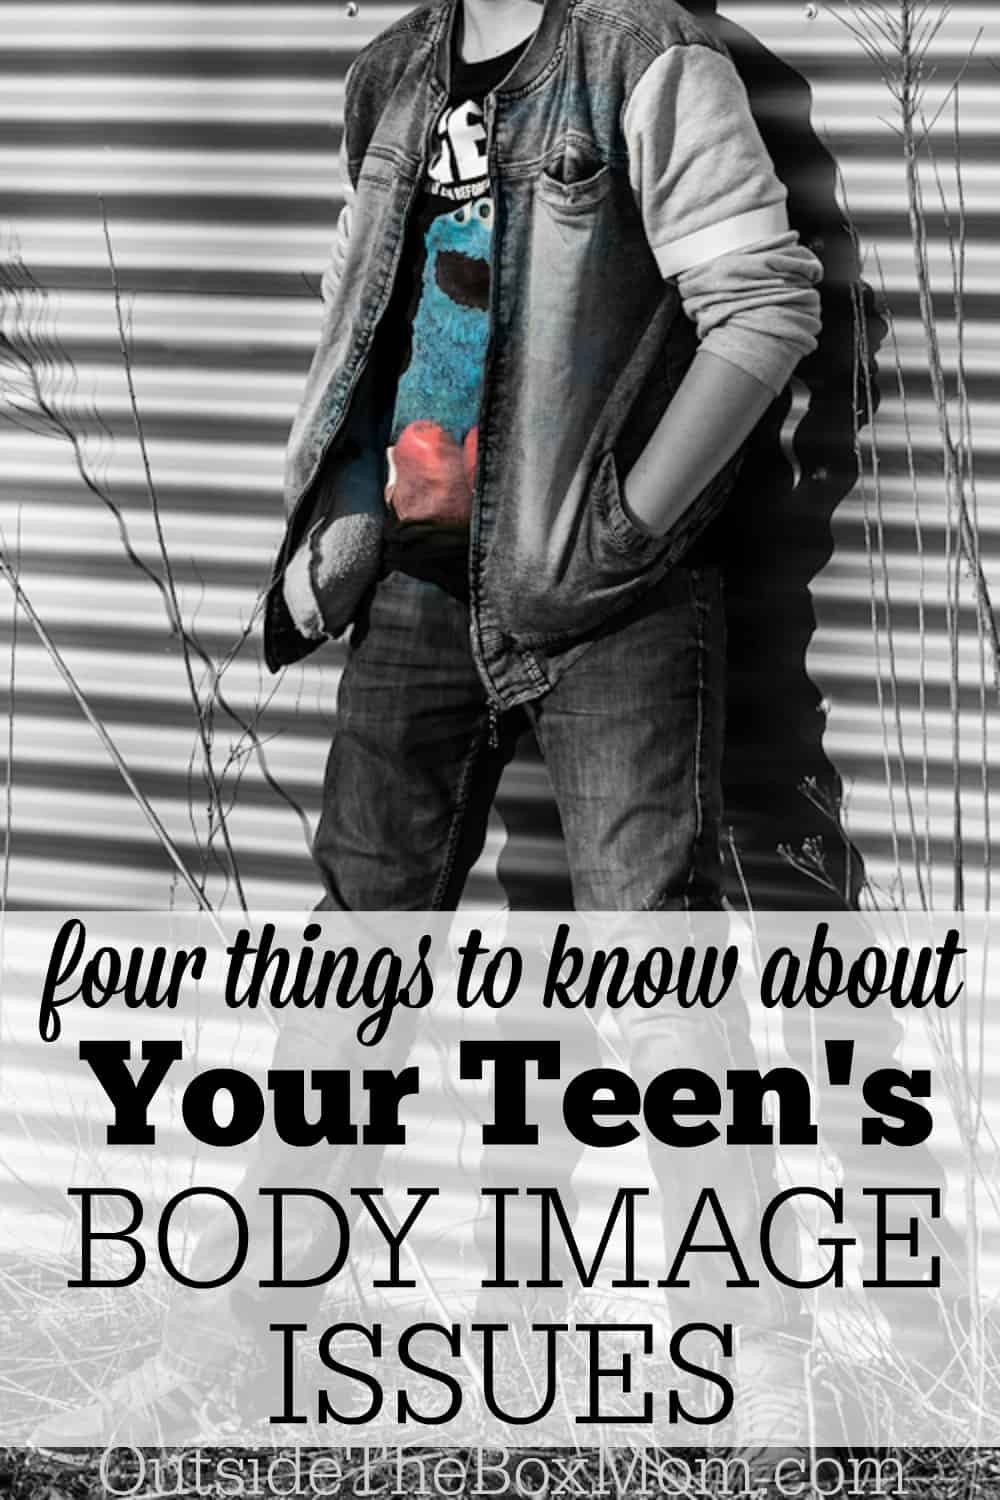 If you have ever struggled with body image issues, you know how difficult it is to develop confidence and self-esteem. Think back to adolescence with the awkwardness, physical changes, and struggle to find our true selves.